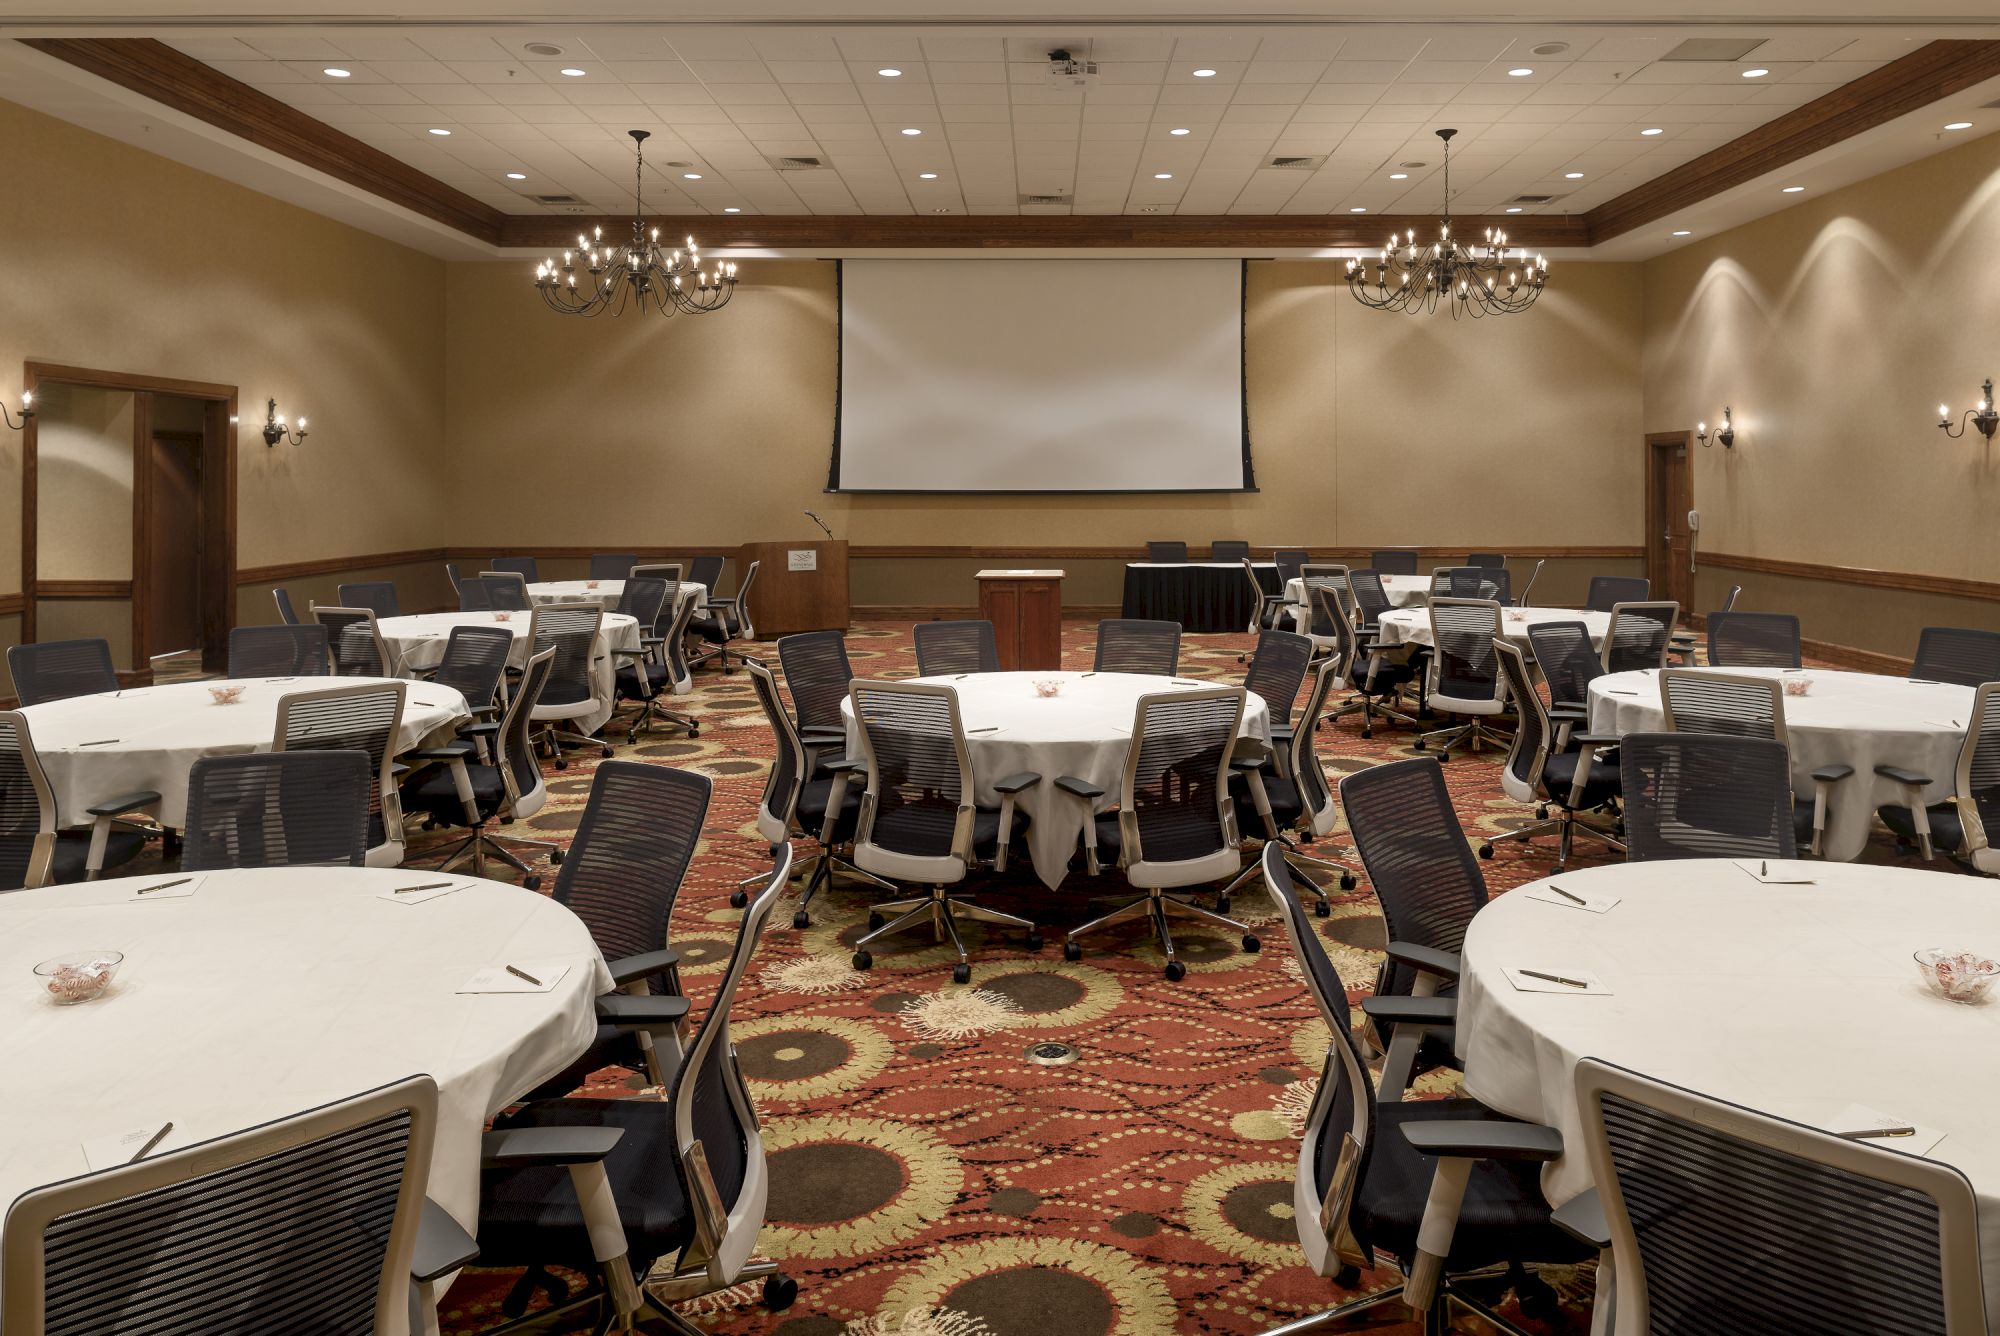 The image shows a conference room with round tables, chairs, chandeliers, and a projector screen at the front, set up for an event or meeting.